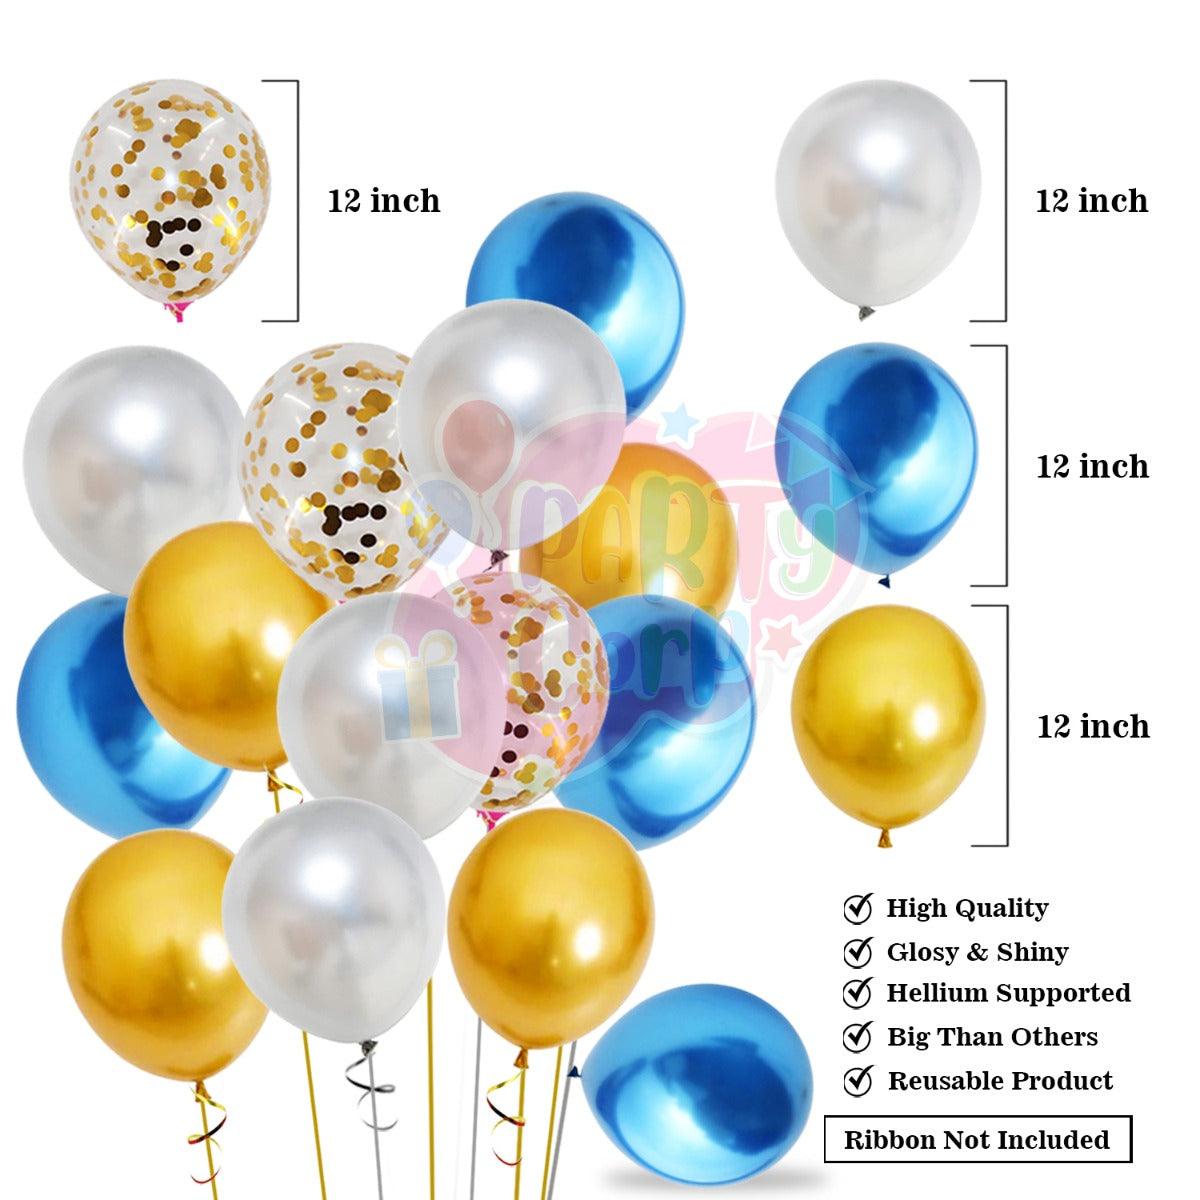 PartyCorp Happy Birthday Decoration Kit Combo 70 Pcs - Gold, Blue, White Chrome & Gold Confetti Balloons, Blue Happy Birthday Banner, Silver Curtain